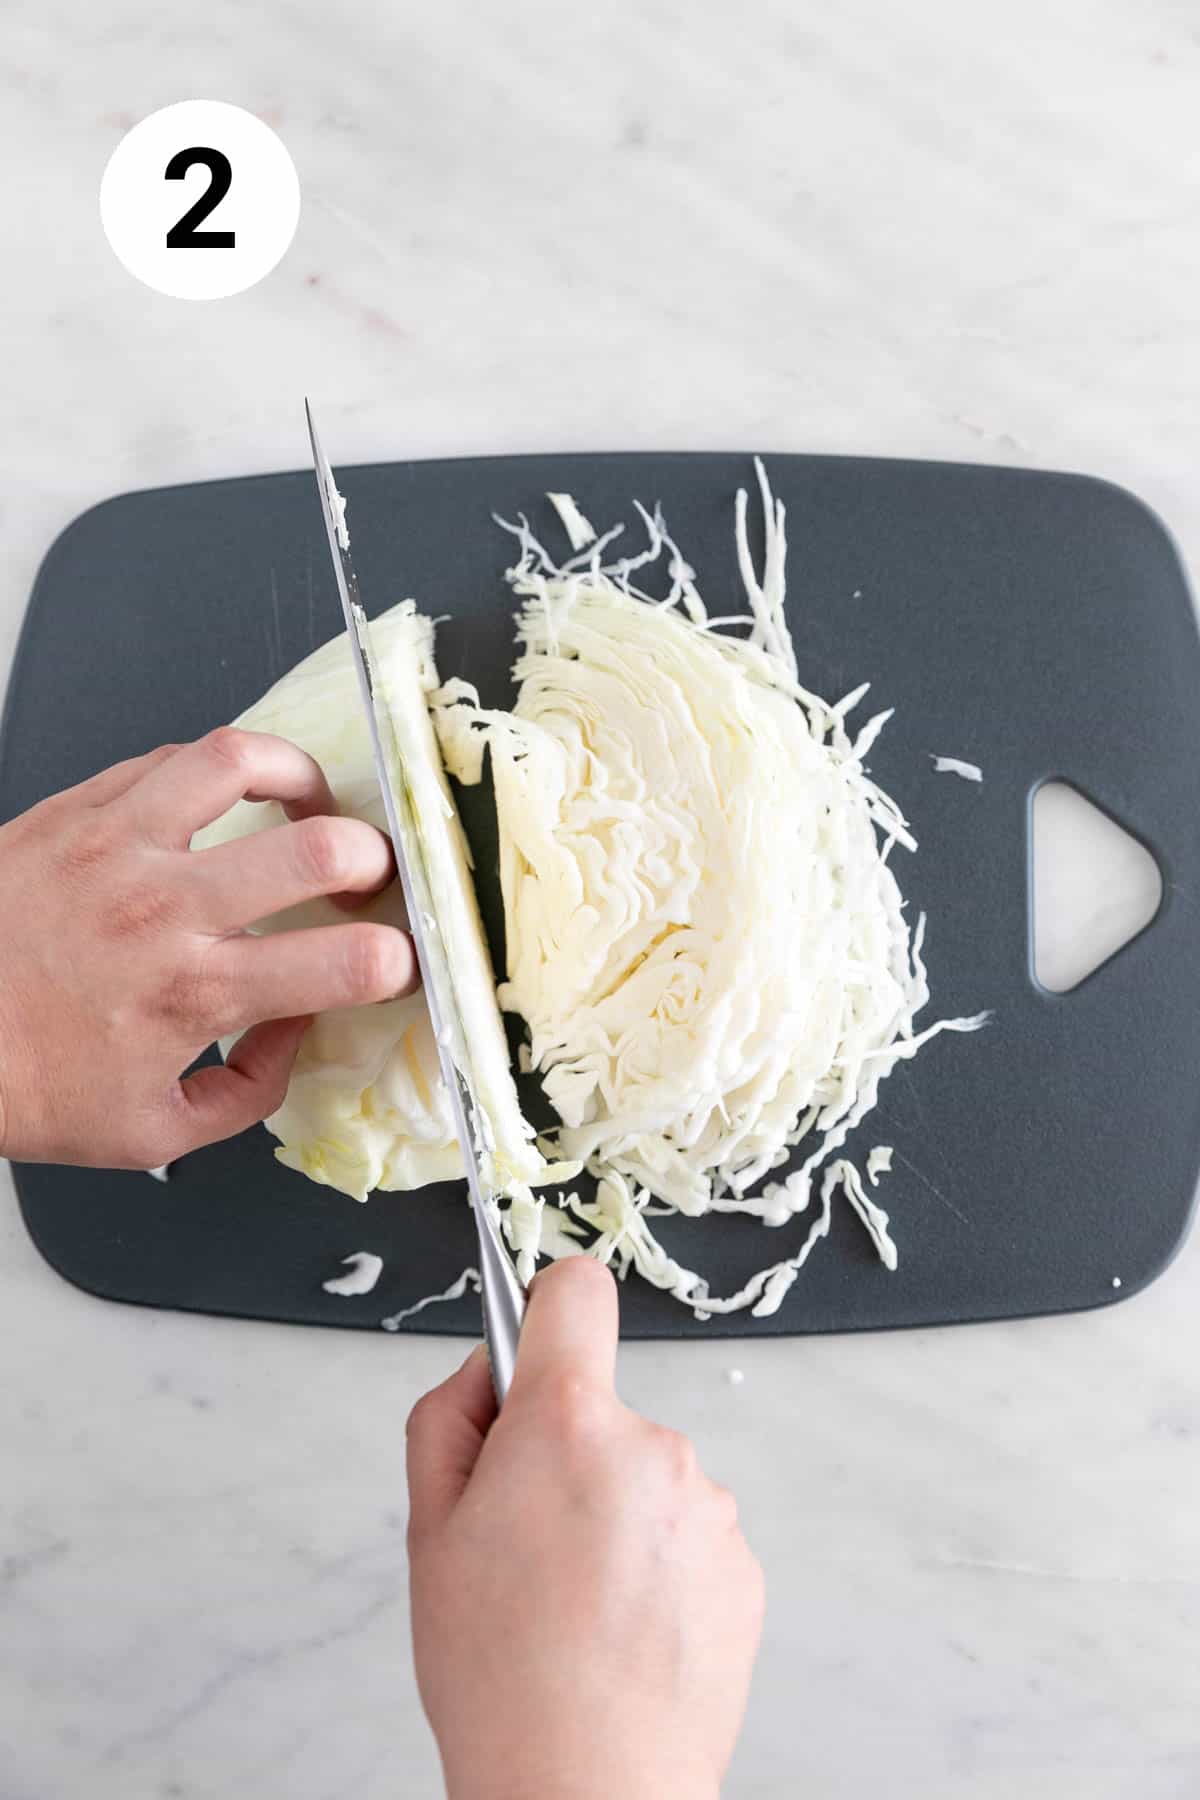 Hands finely chopping cabbage on a cutting board.